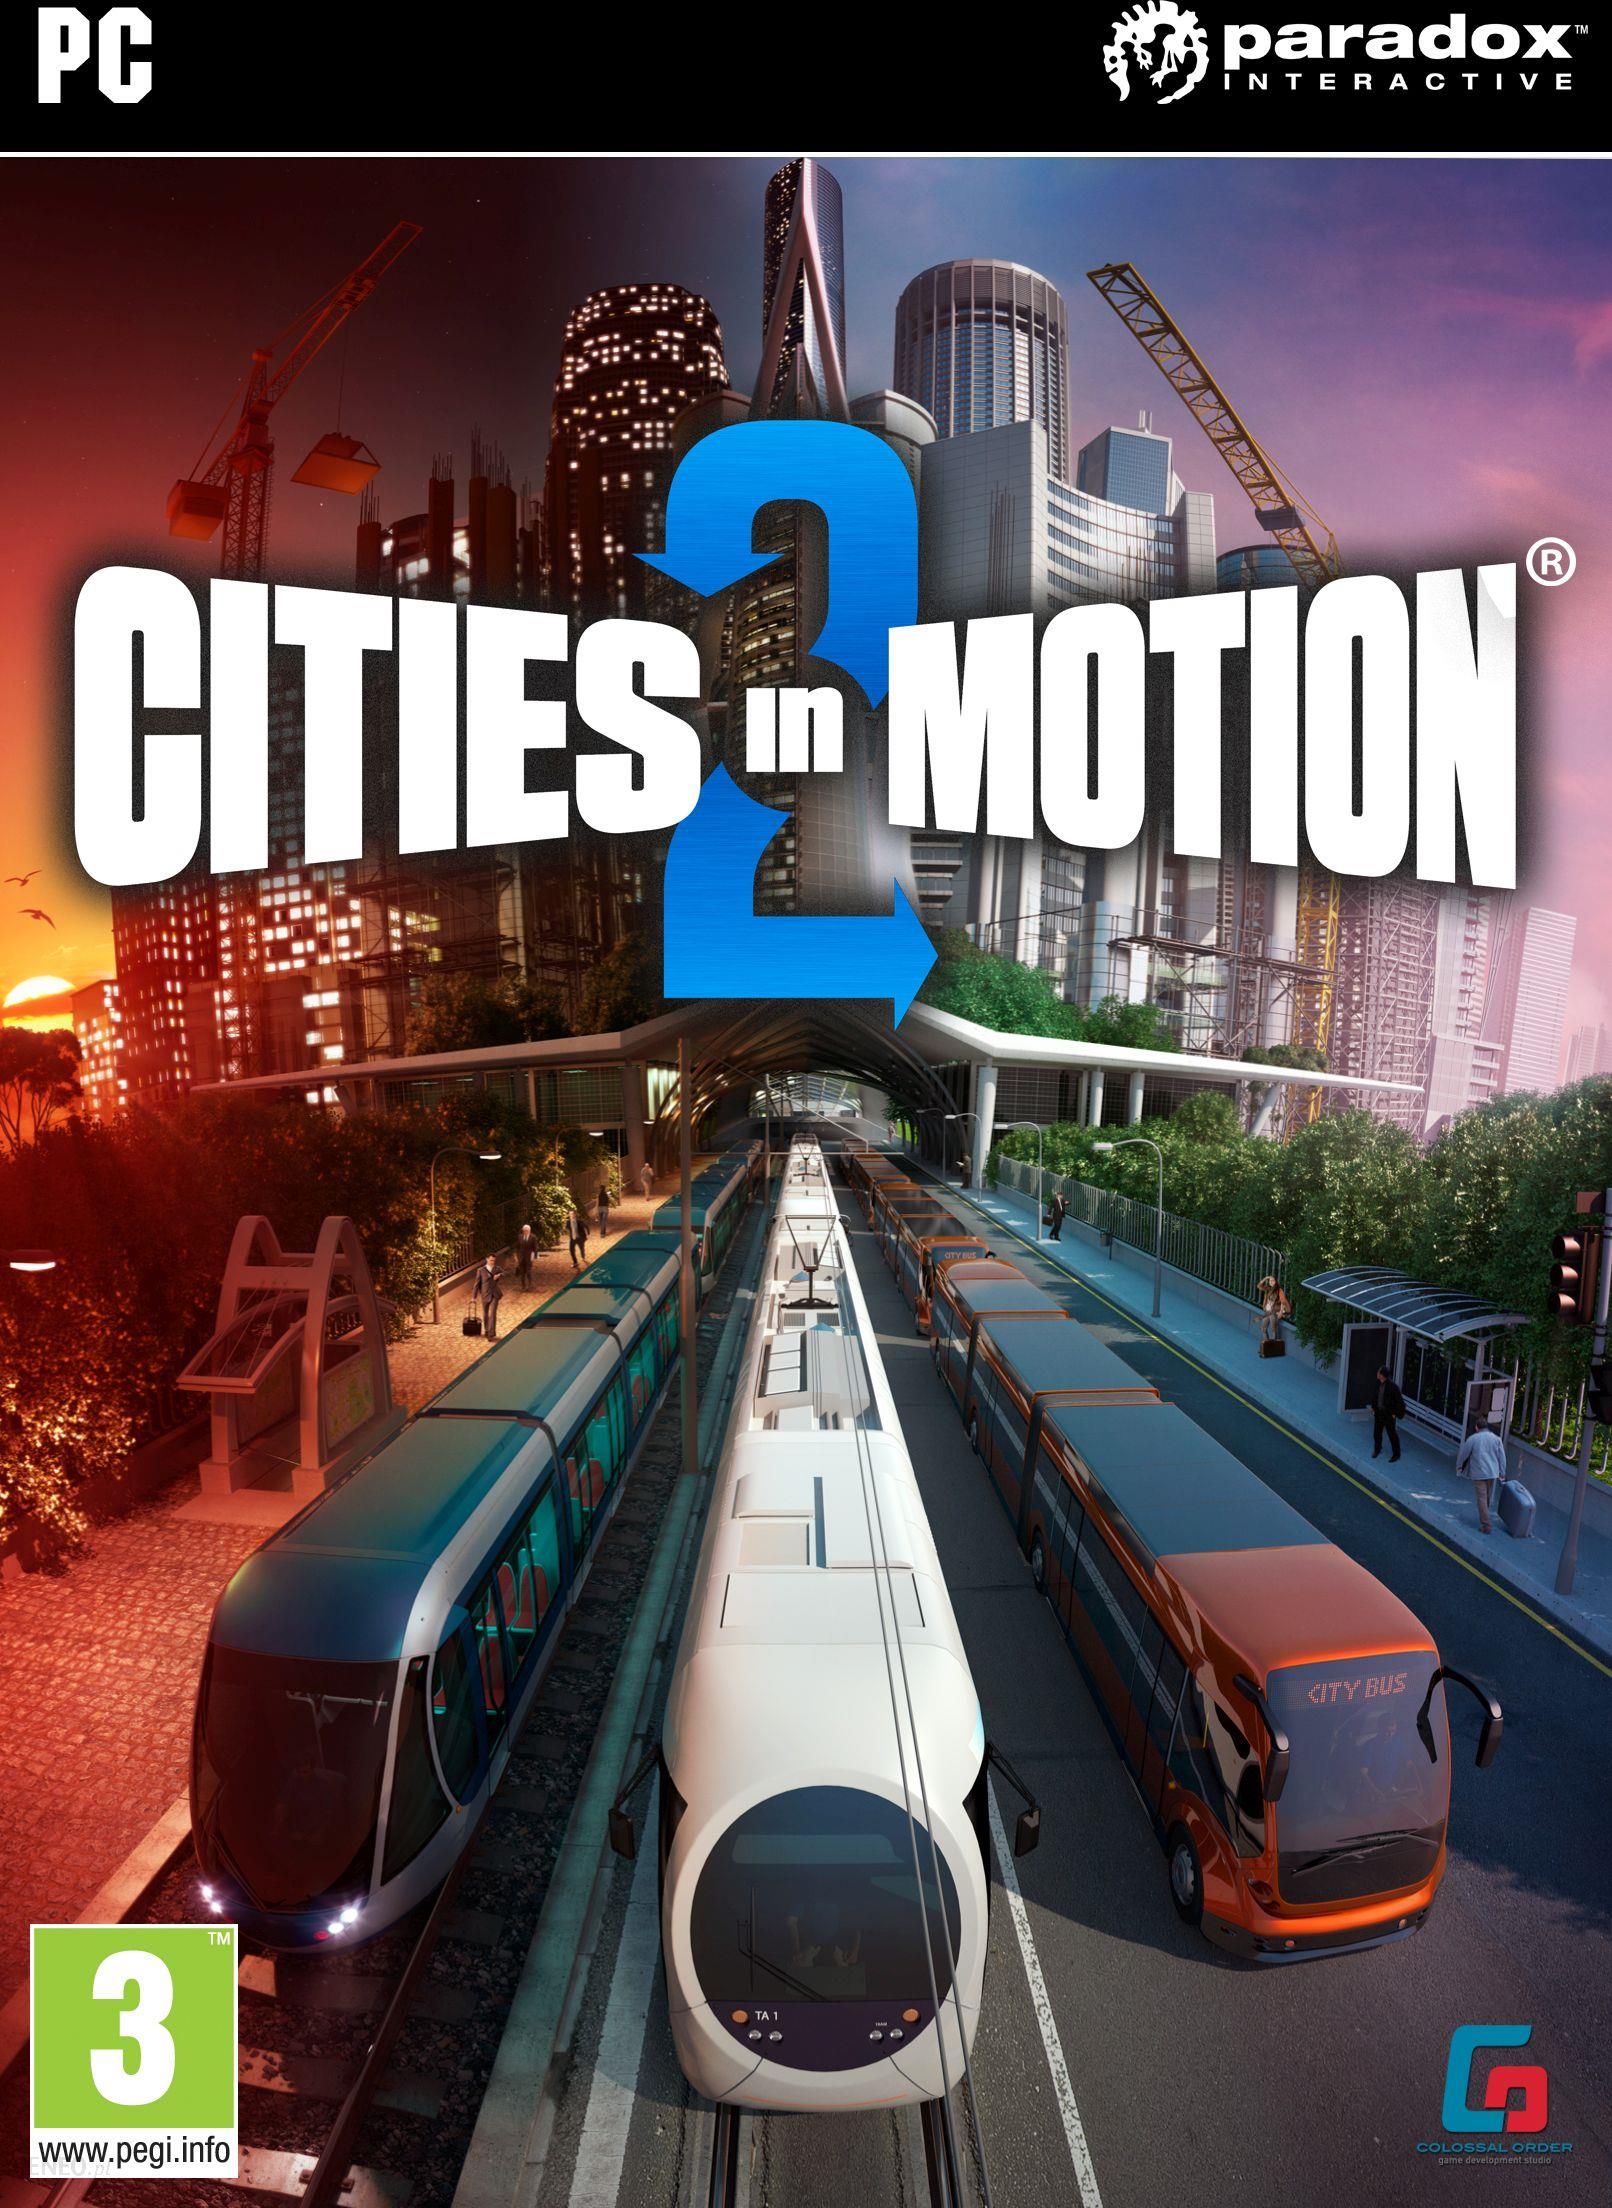 Cities in motion on steam фото 57